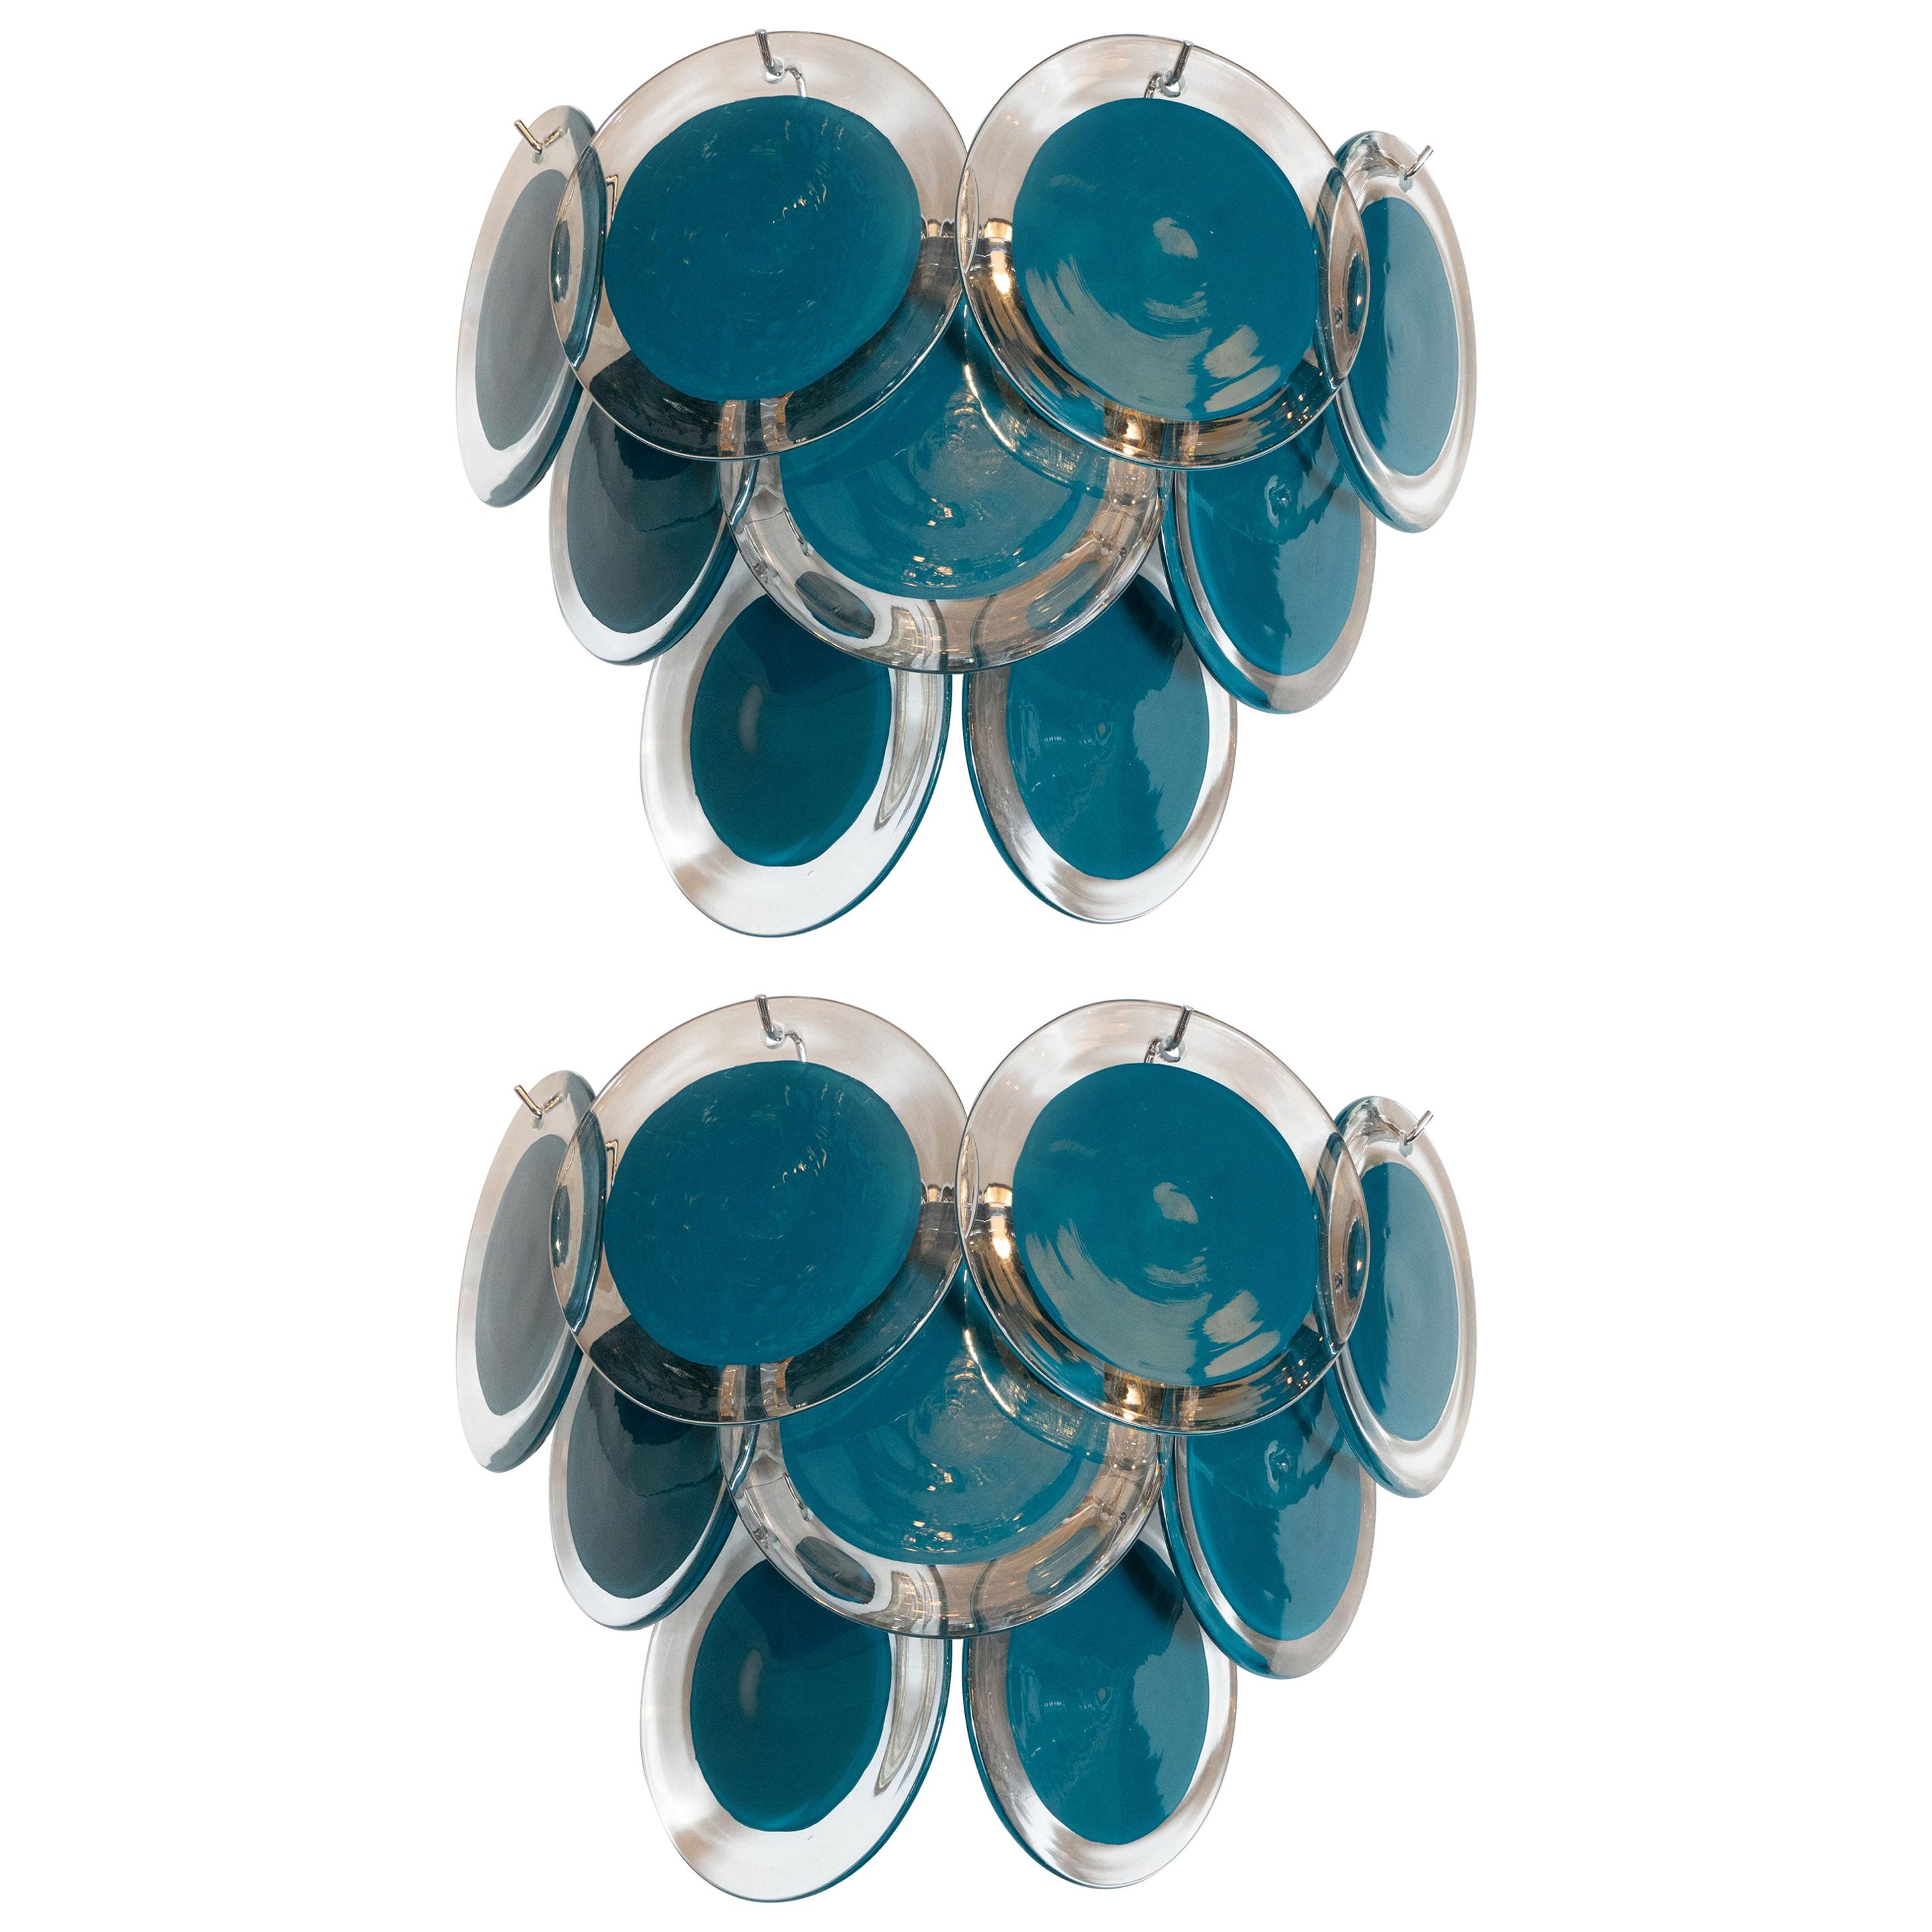 Pair of Modernist 9-Disc Hand Blown Murano Turquoise & Translucent Glass Sconces